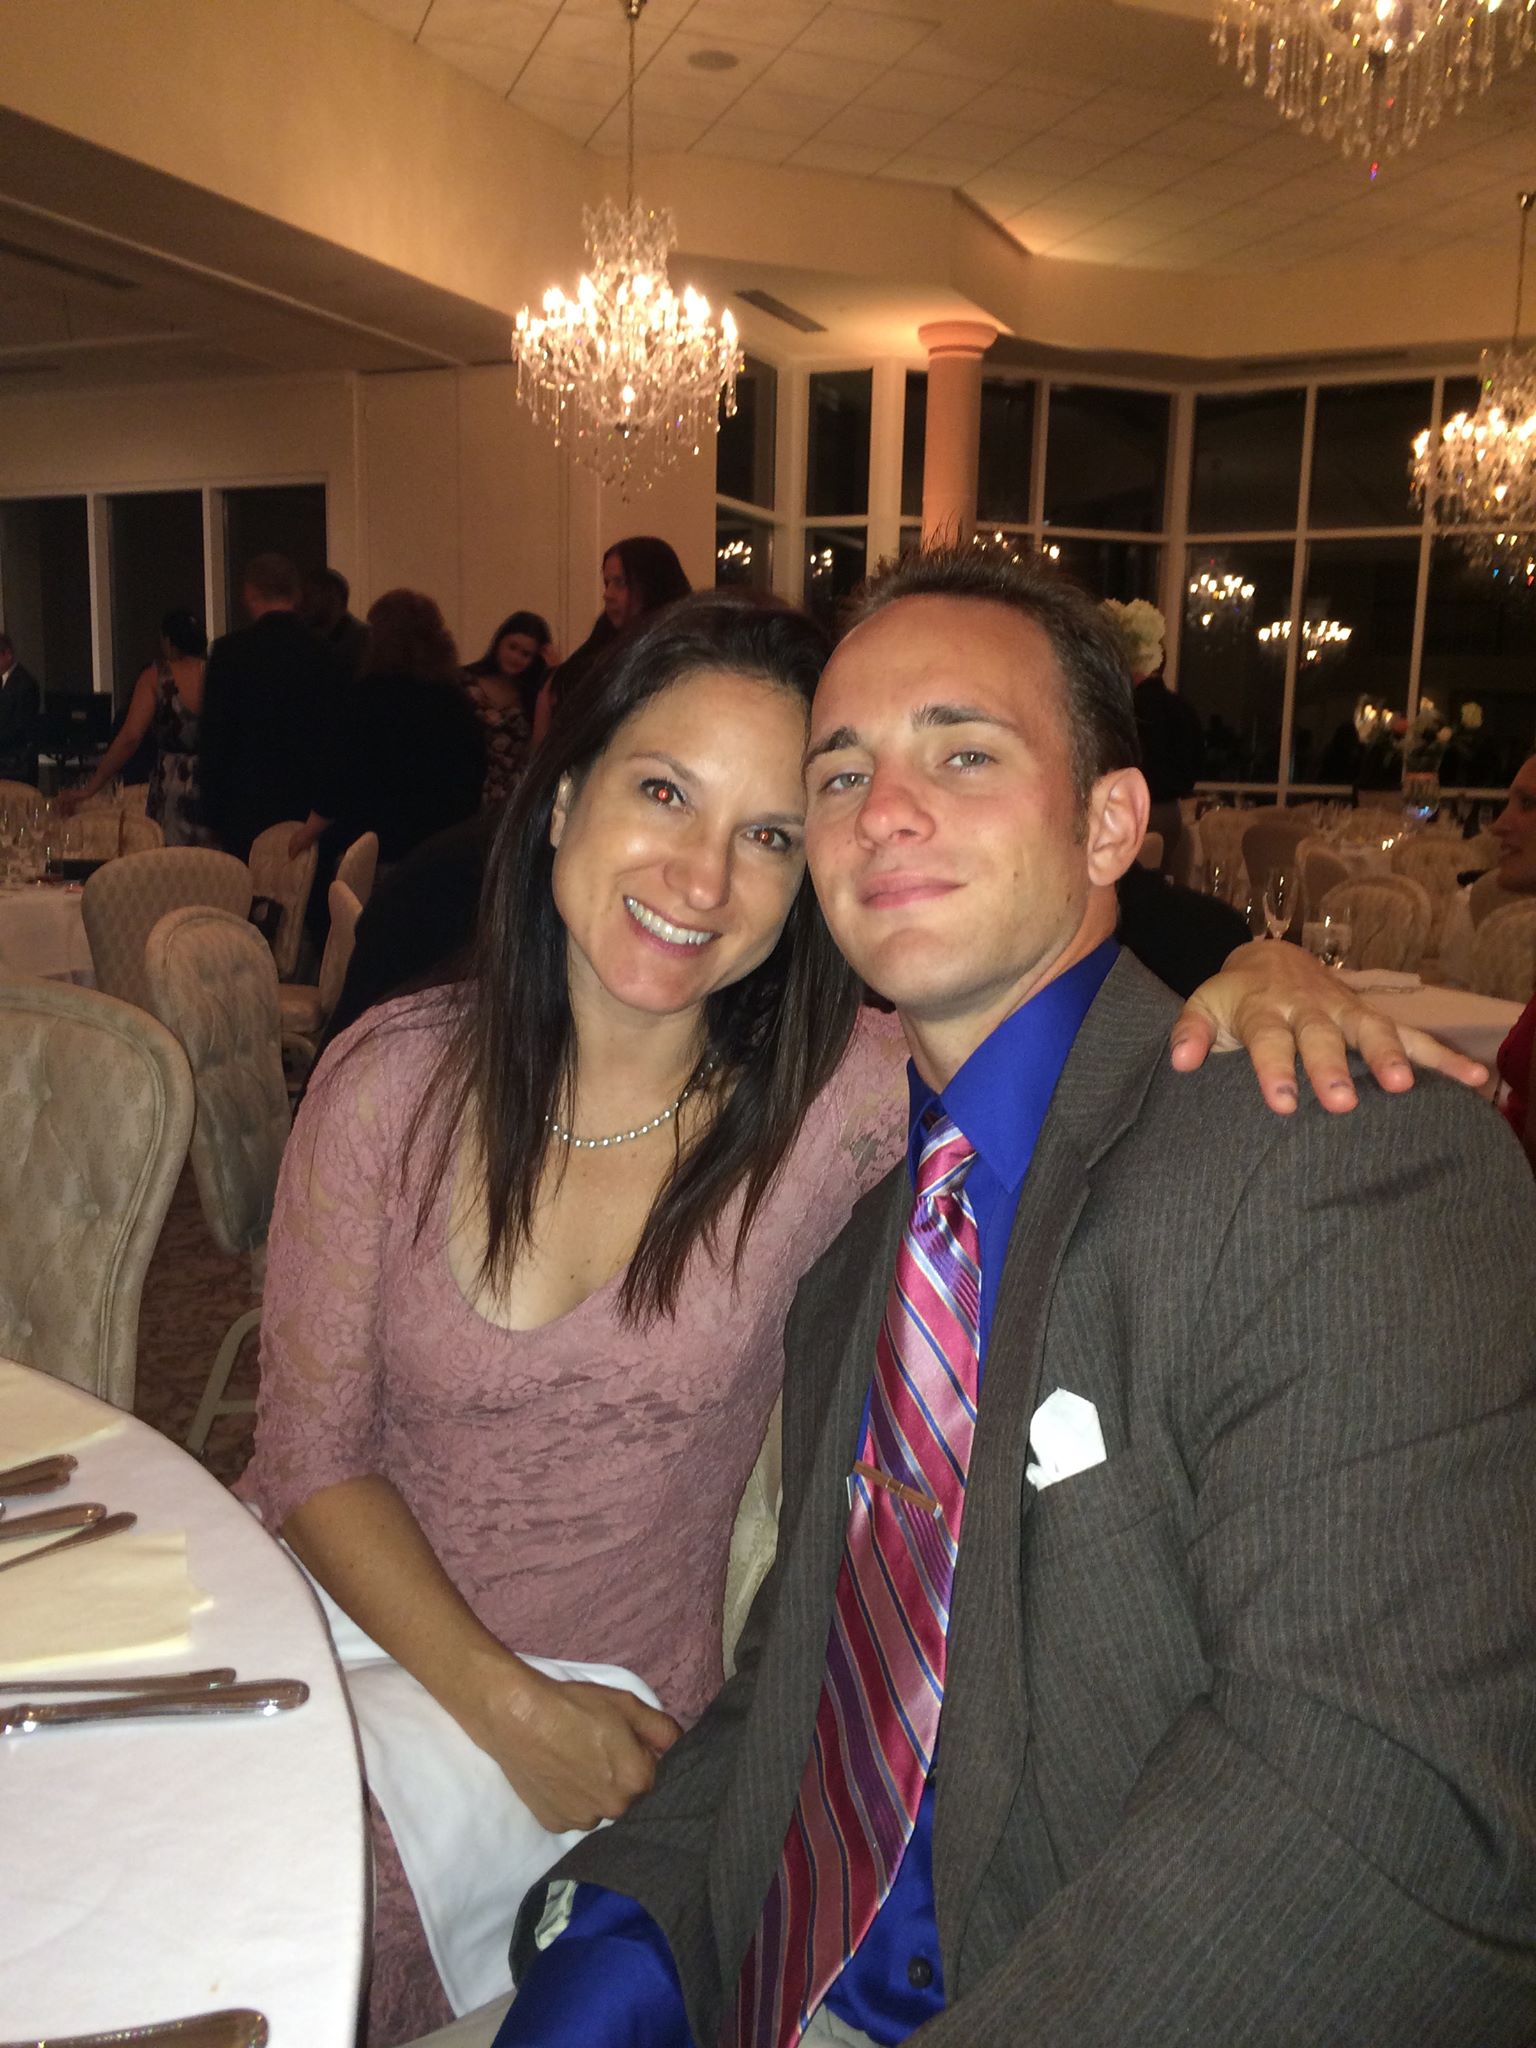 brian and michelle looking good as a couple dressed up sitting at a table at a wedding reception